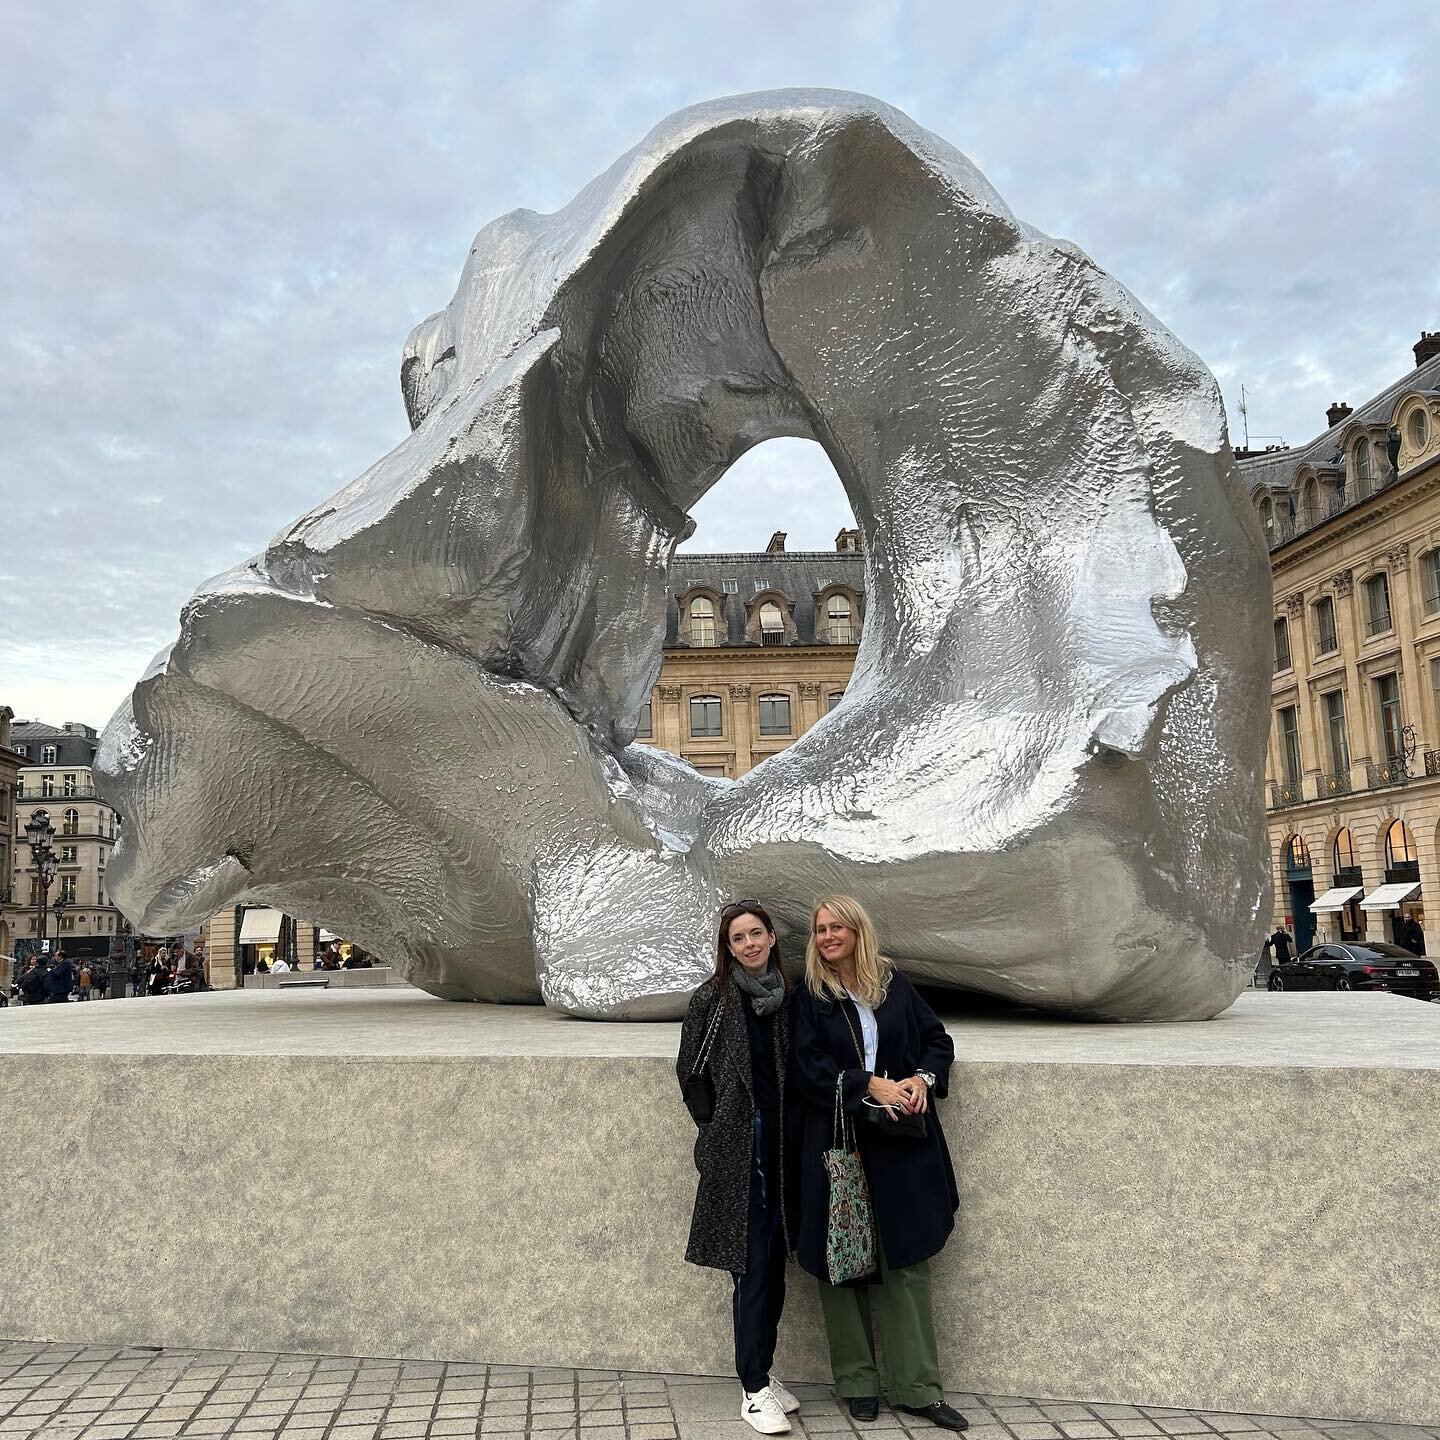 An embarrassment of outstanding sculpture, both indoor and out, last week in Paris. 

Urs Fischer @choasursfisher at Place Vend&ocirc;me presented by Gagosian @gagosian as part of Paris+ Par Art Basel&rsquo;s Public Program

Zanele Muholi @muholizane